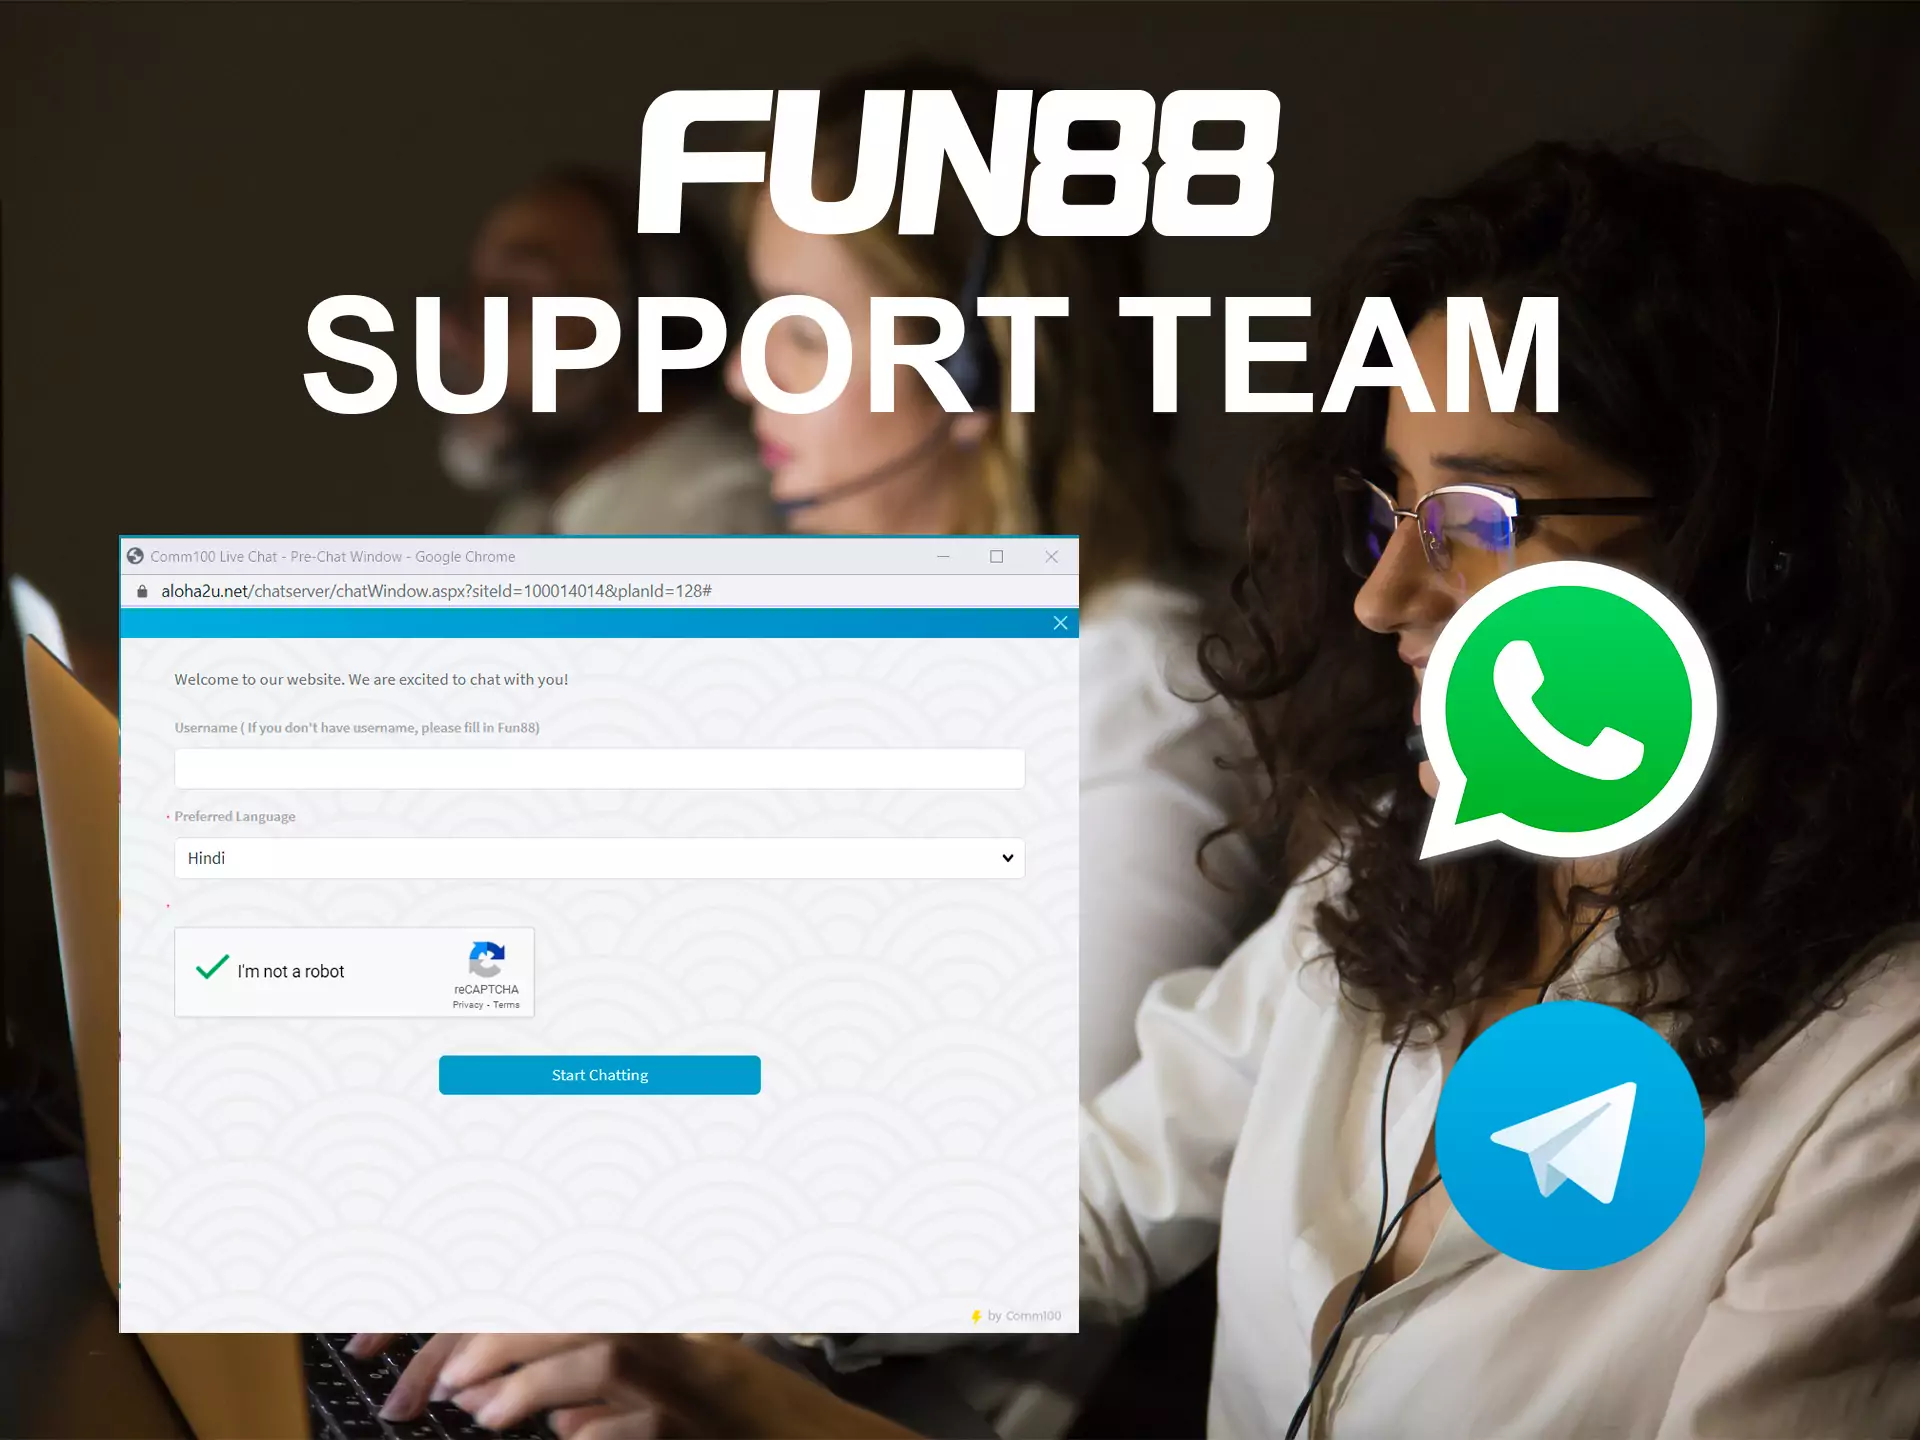 Fun88 support team works 24/7 and you can contact it whenever you have a problem.